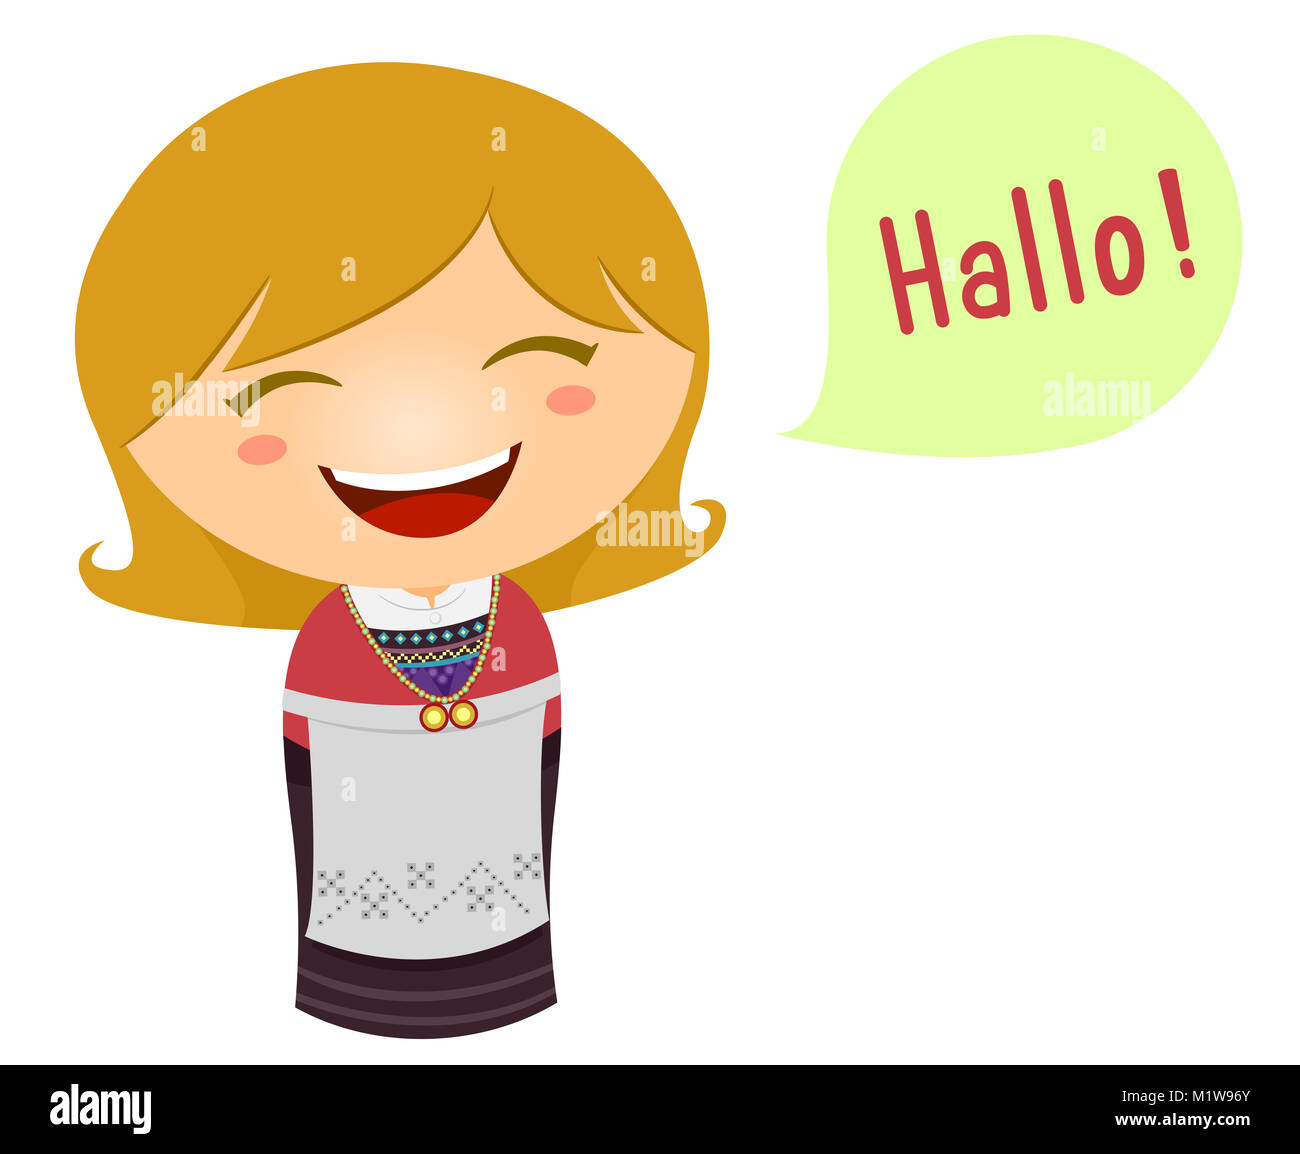 Cute Illustration of a Little Girl in a Norwegian Costume Saying Hello in Her Language Stock Photo